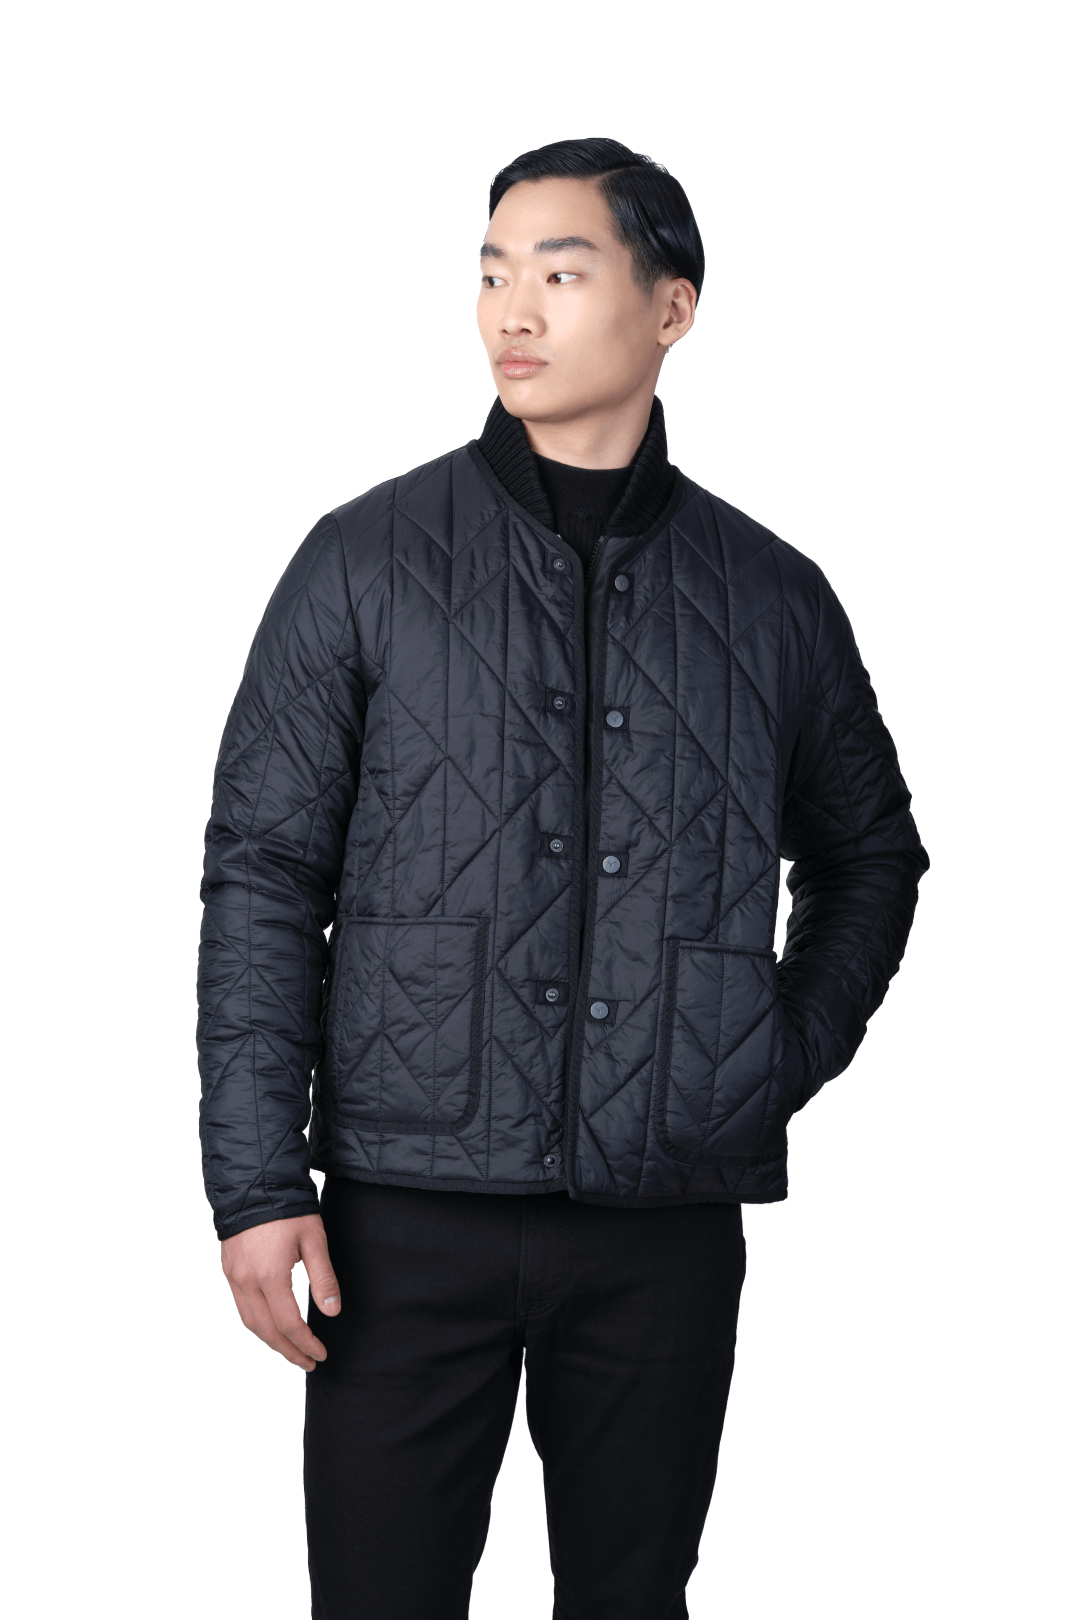 Lunar New Year Men's Quilted Short Jacket in hip length, sustainable and environmentally friendly Primaloft Gold Insulation Active+, with branded snap button front, two waist patch pockets, and chevron quilted body, in Black